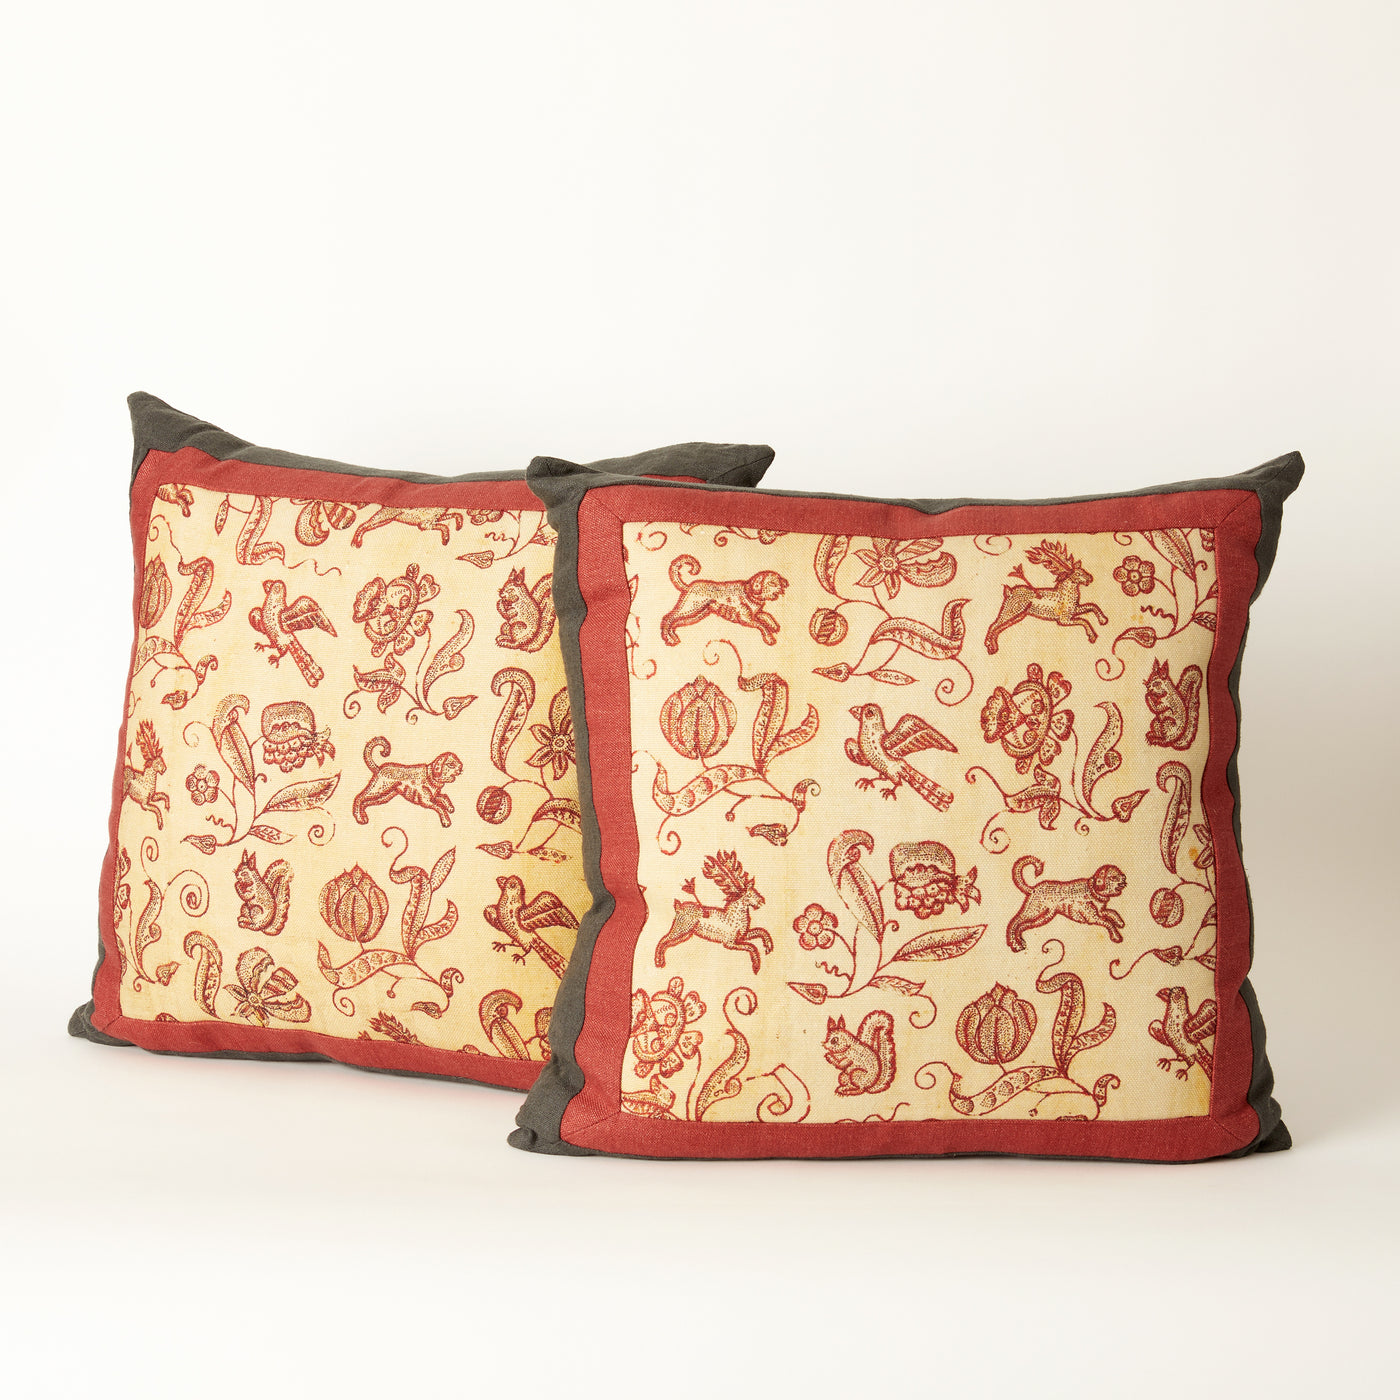 Pillow with Framed Vintage Italian Linen Design (Red & Brown)